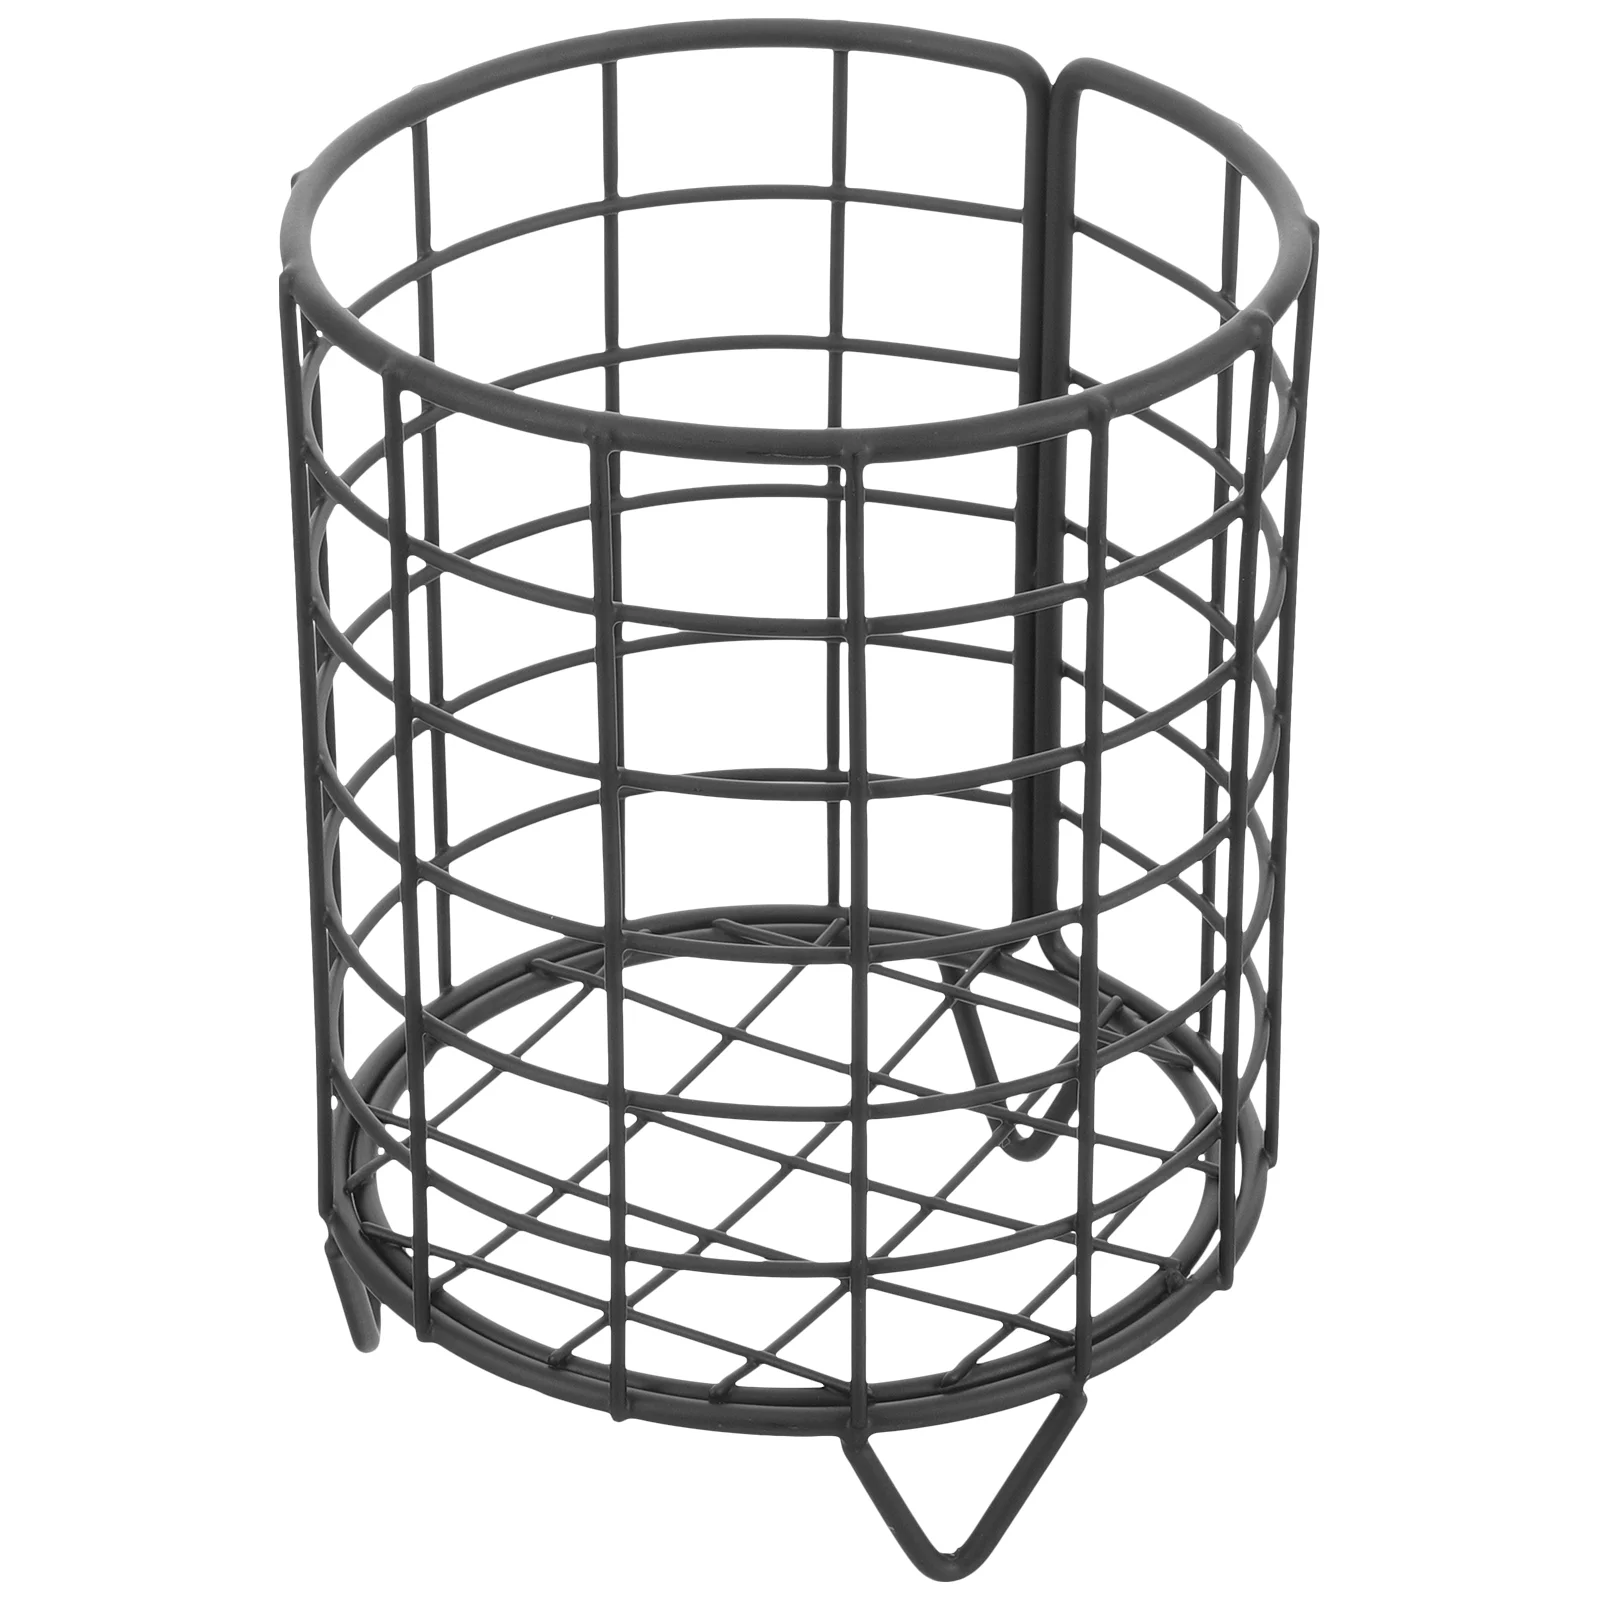 

Rabbit Hay Rack Holder Guinea Pigs Sundries Storage Basket Bunny Feeders Wrought Iron For Cages Convenient Wear-resistant